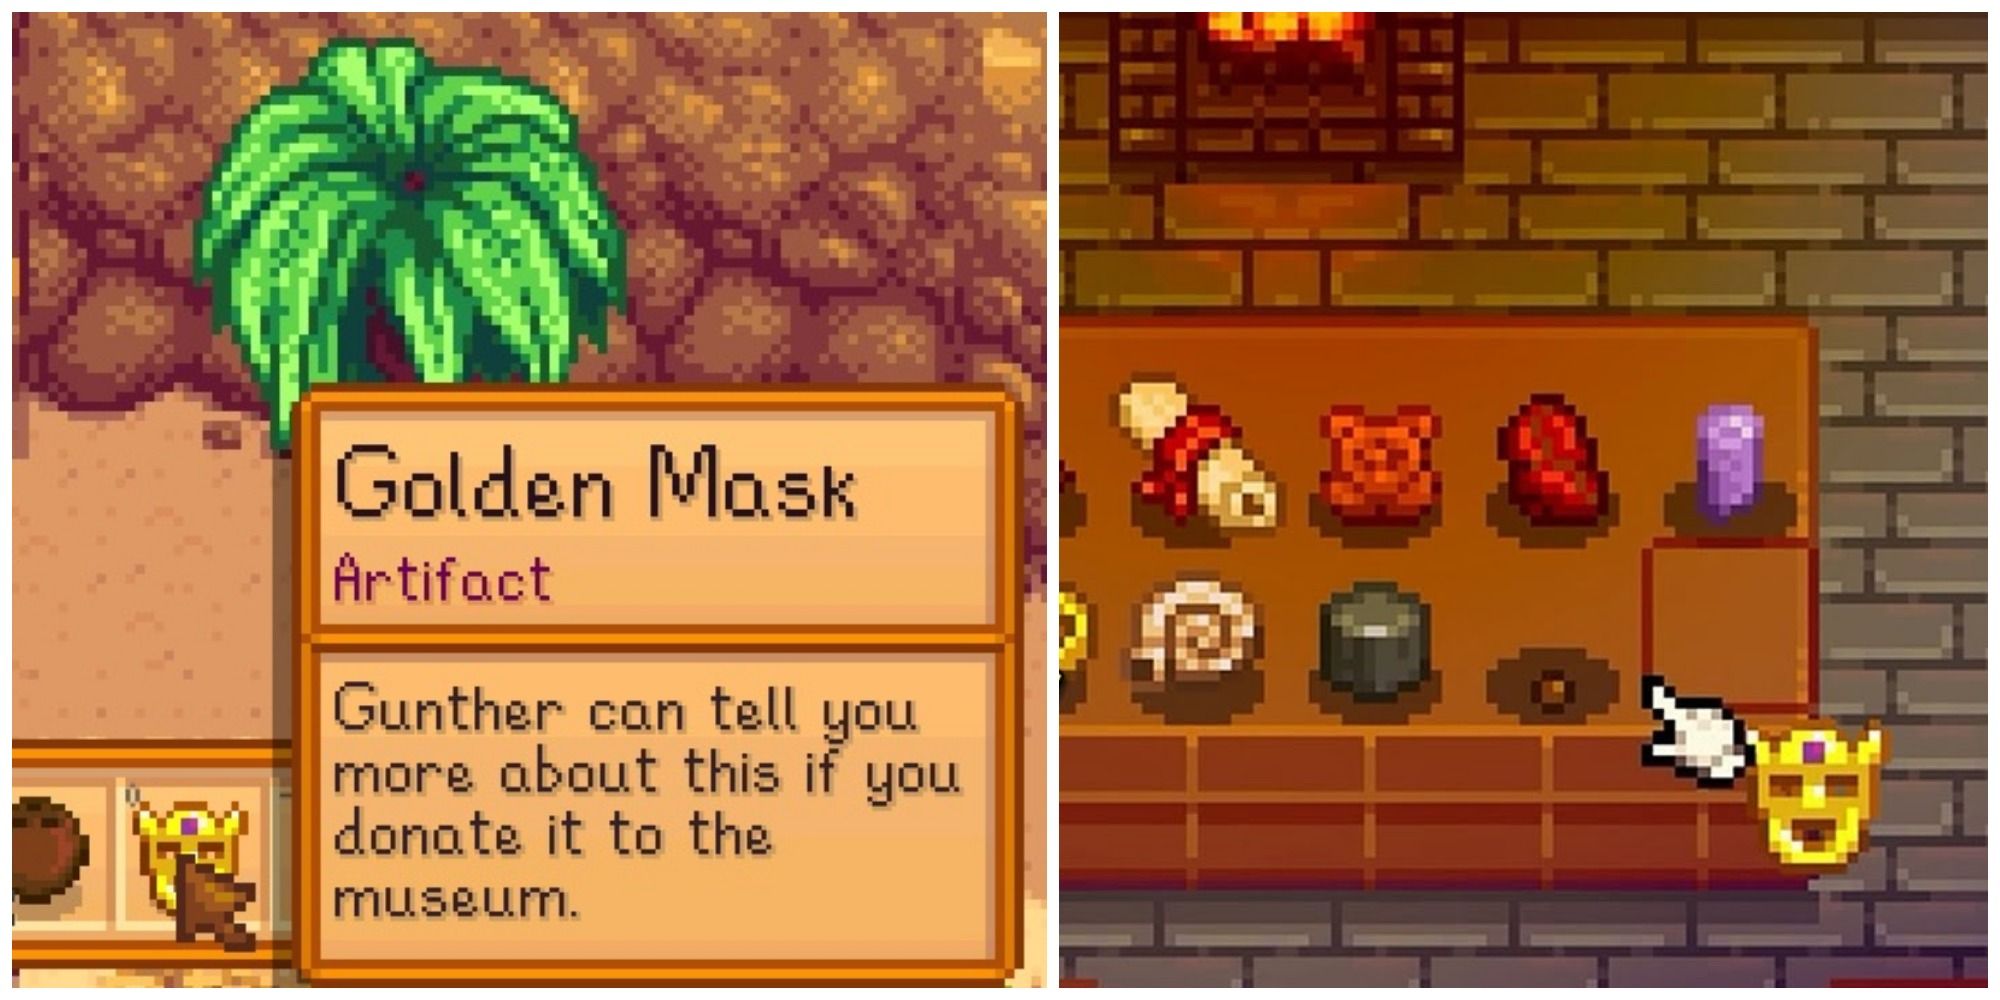 golden mask donating to museum